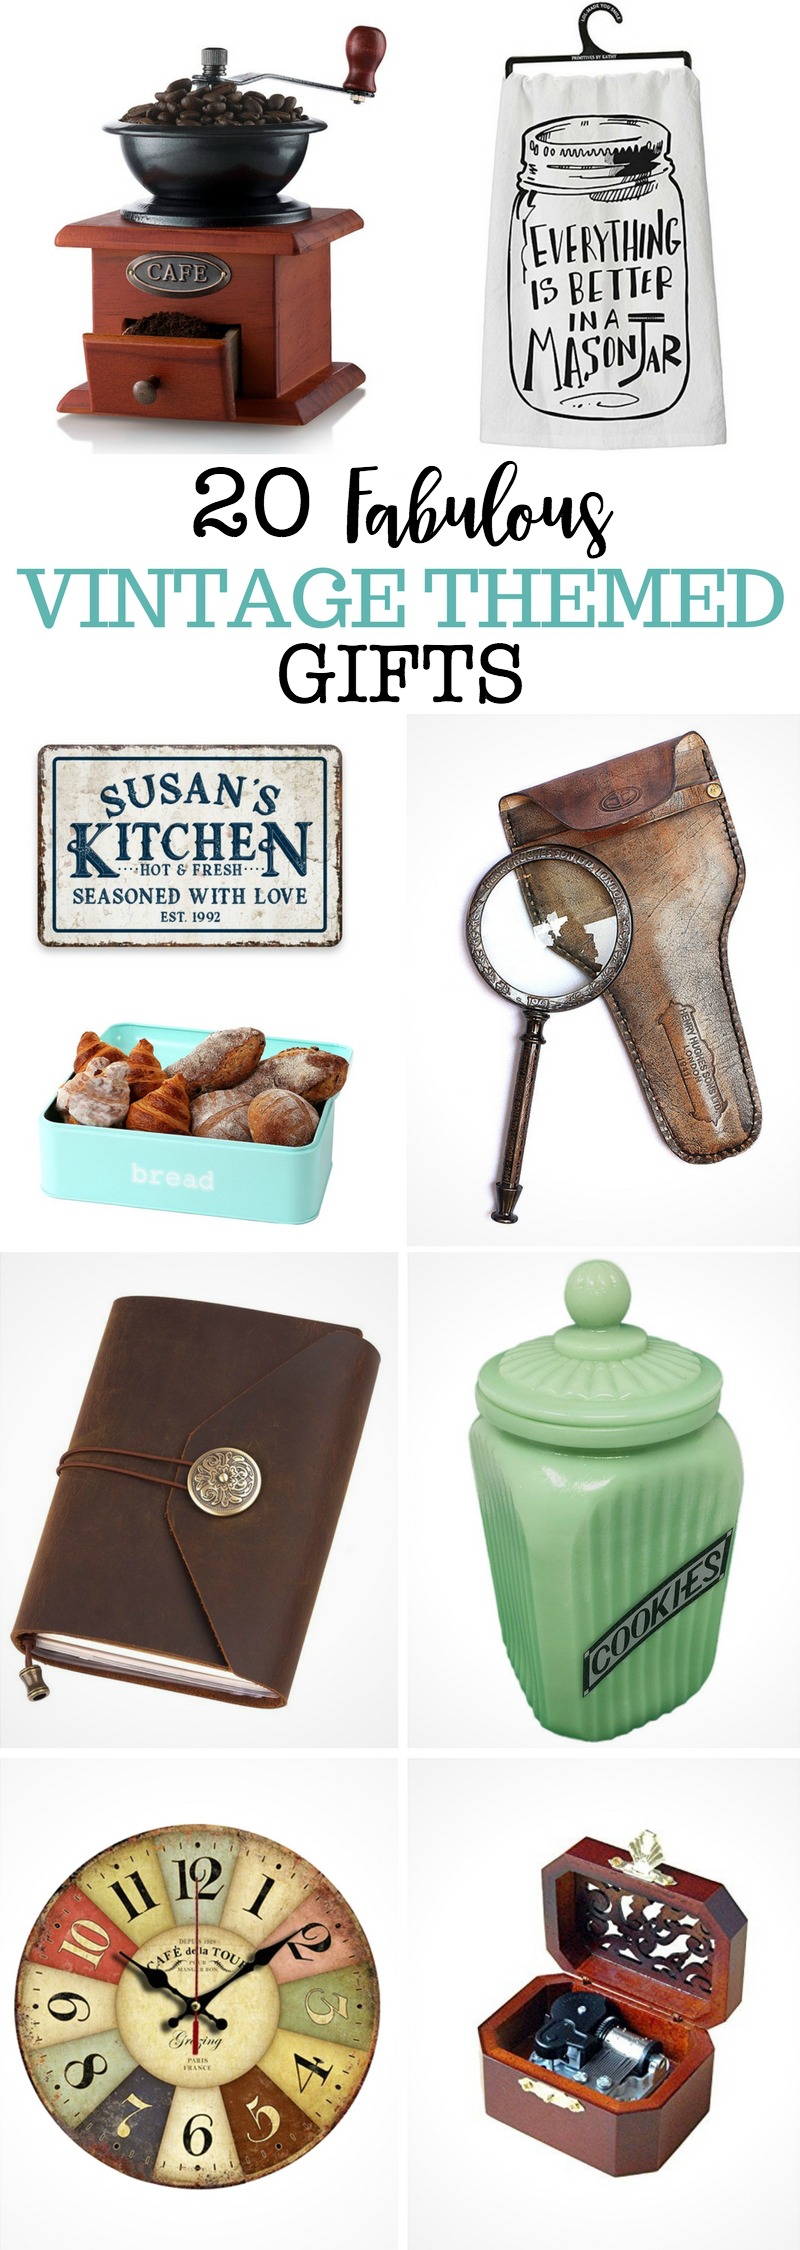 Vintage Themed Gifts for Holiday Gift Giving